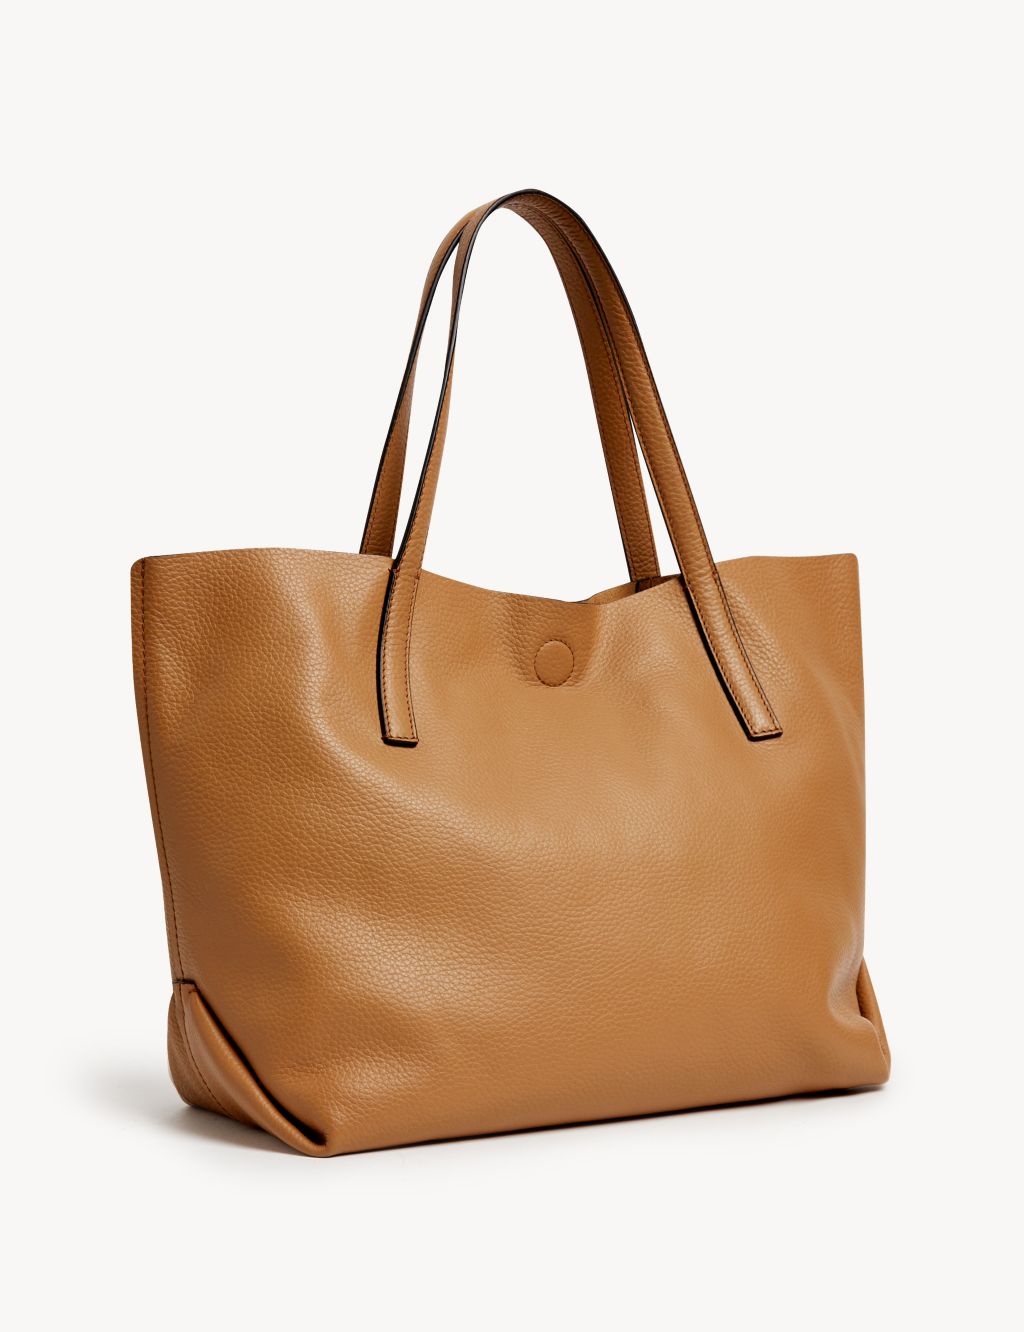 Leather Tote Bag image 1